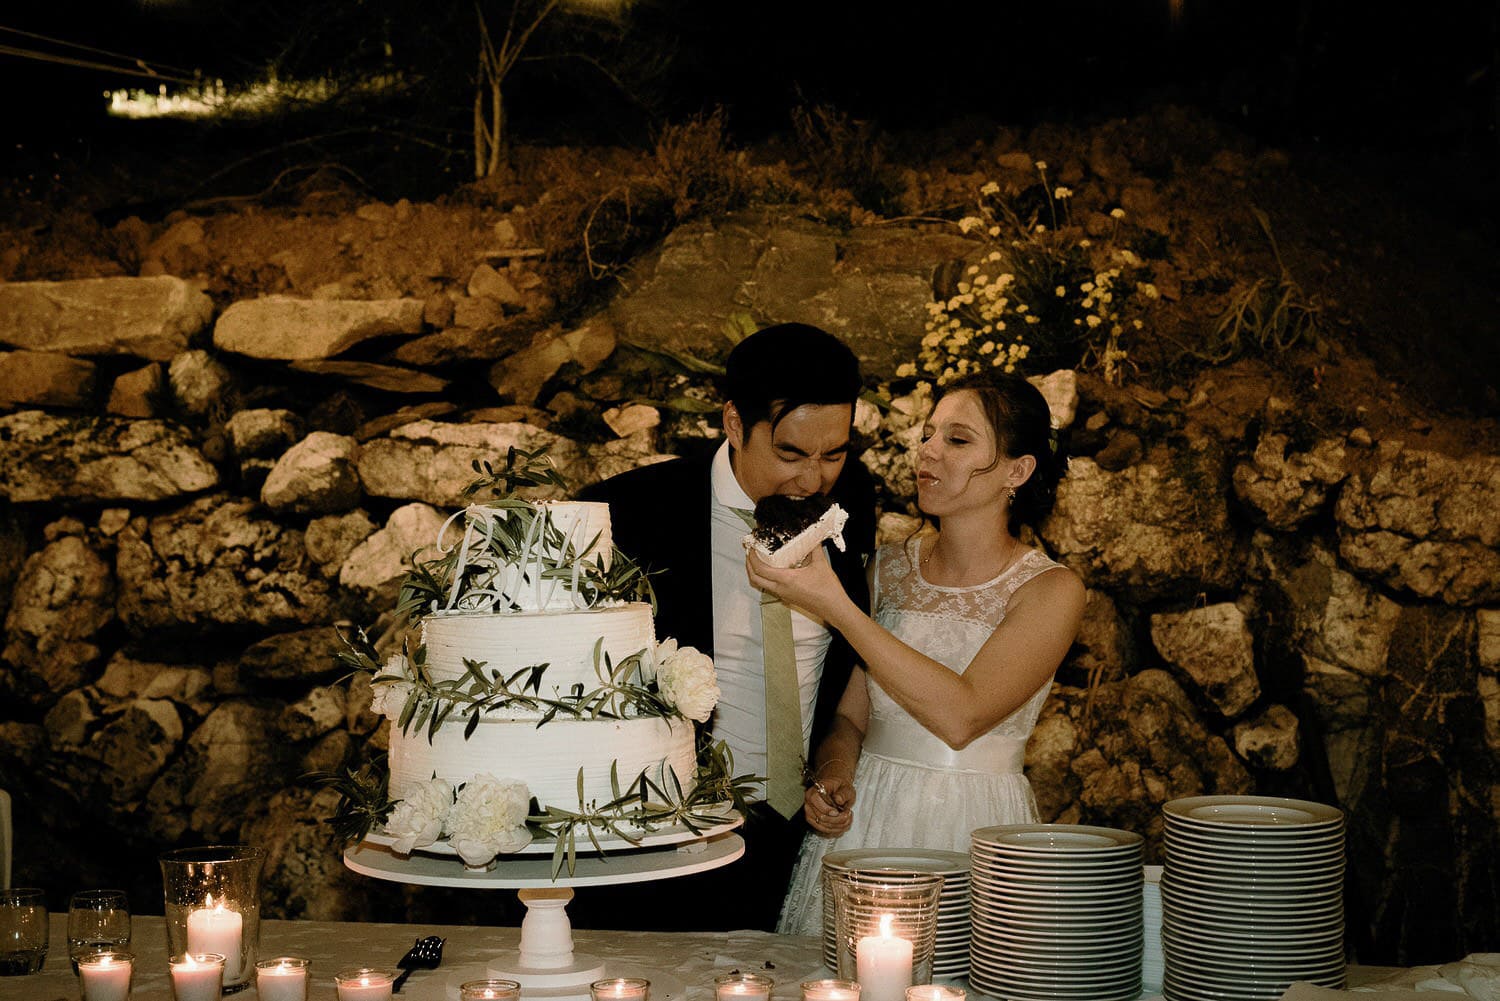 Charming Destination Wedding in the Portuguese Countryside - groom taking a big bite of the wedding cake